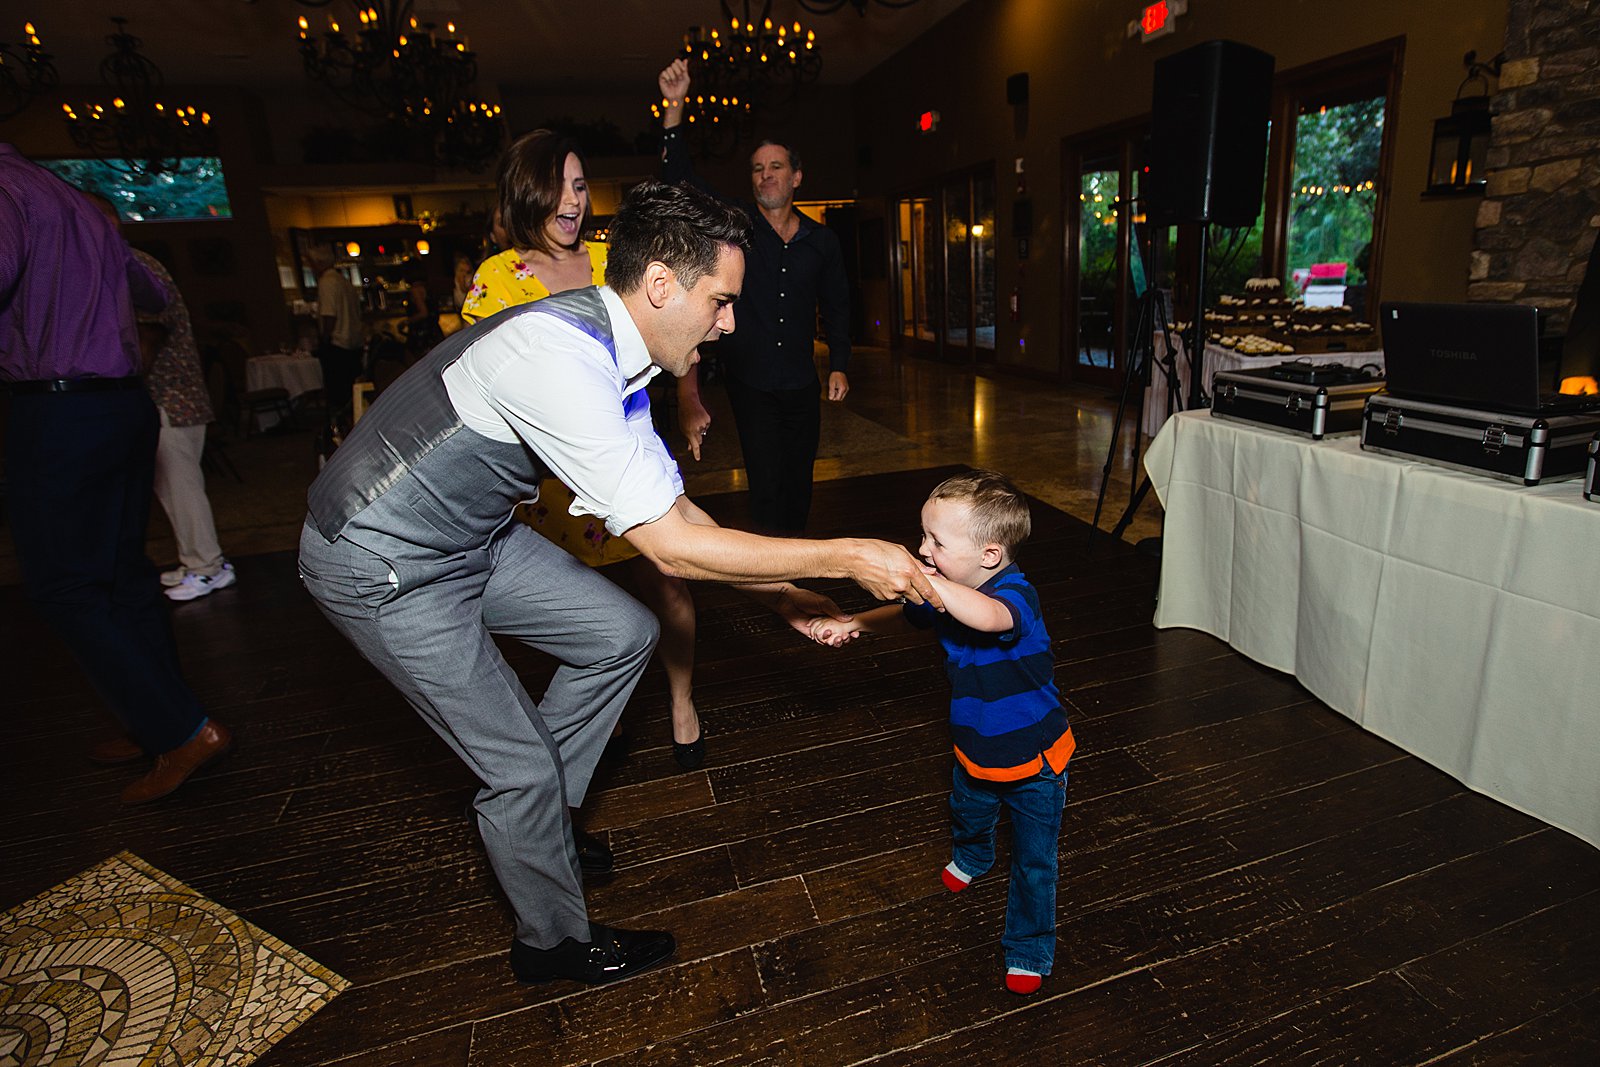 Guests dancing at The Windmill House wedding reception by Chino Valley wedding photographer PMA Photography